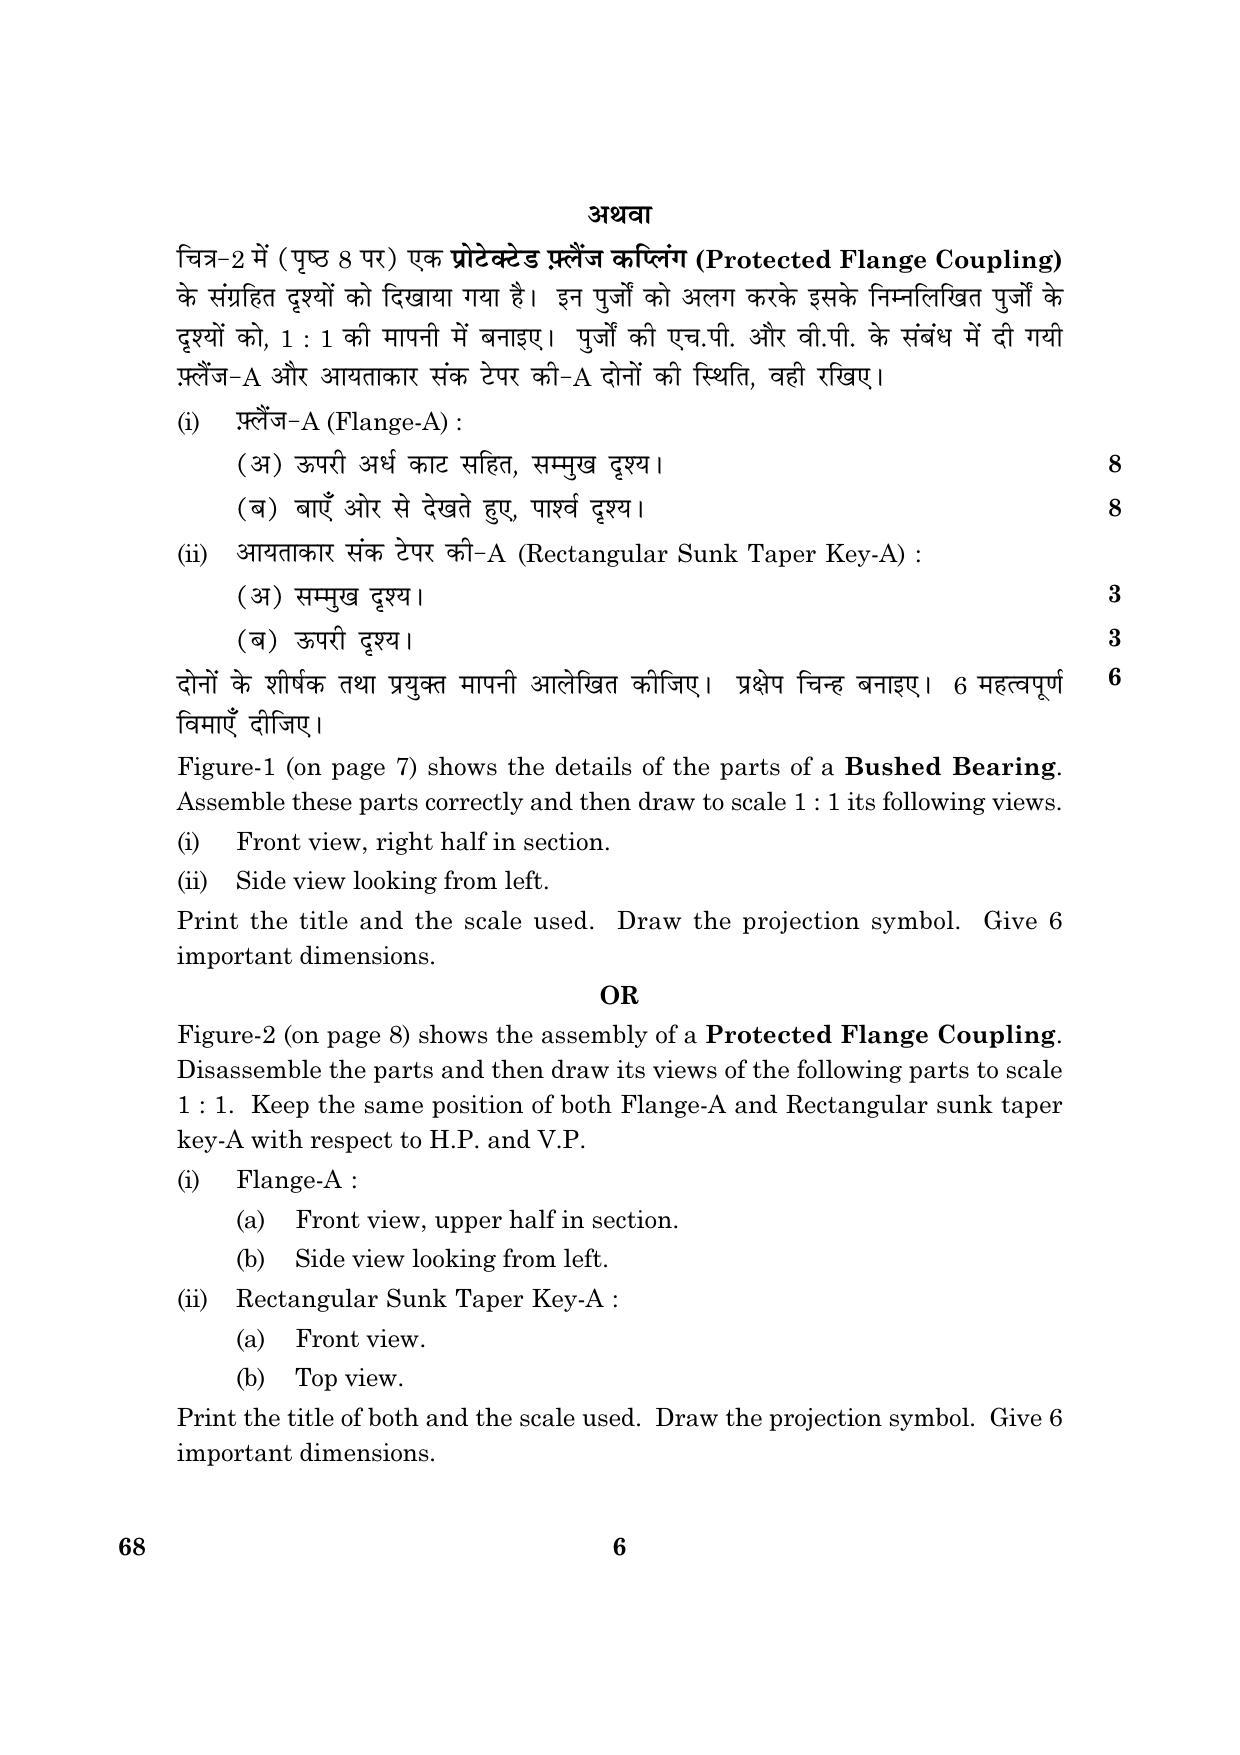 CBSE Class 12 068 Engineering Graphics 2016 Question Paper - Page 6